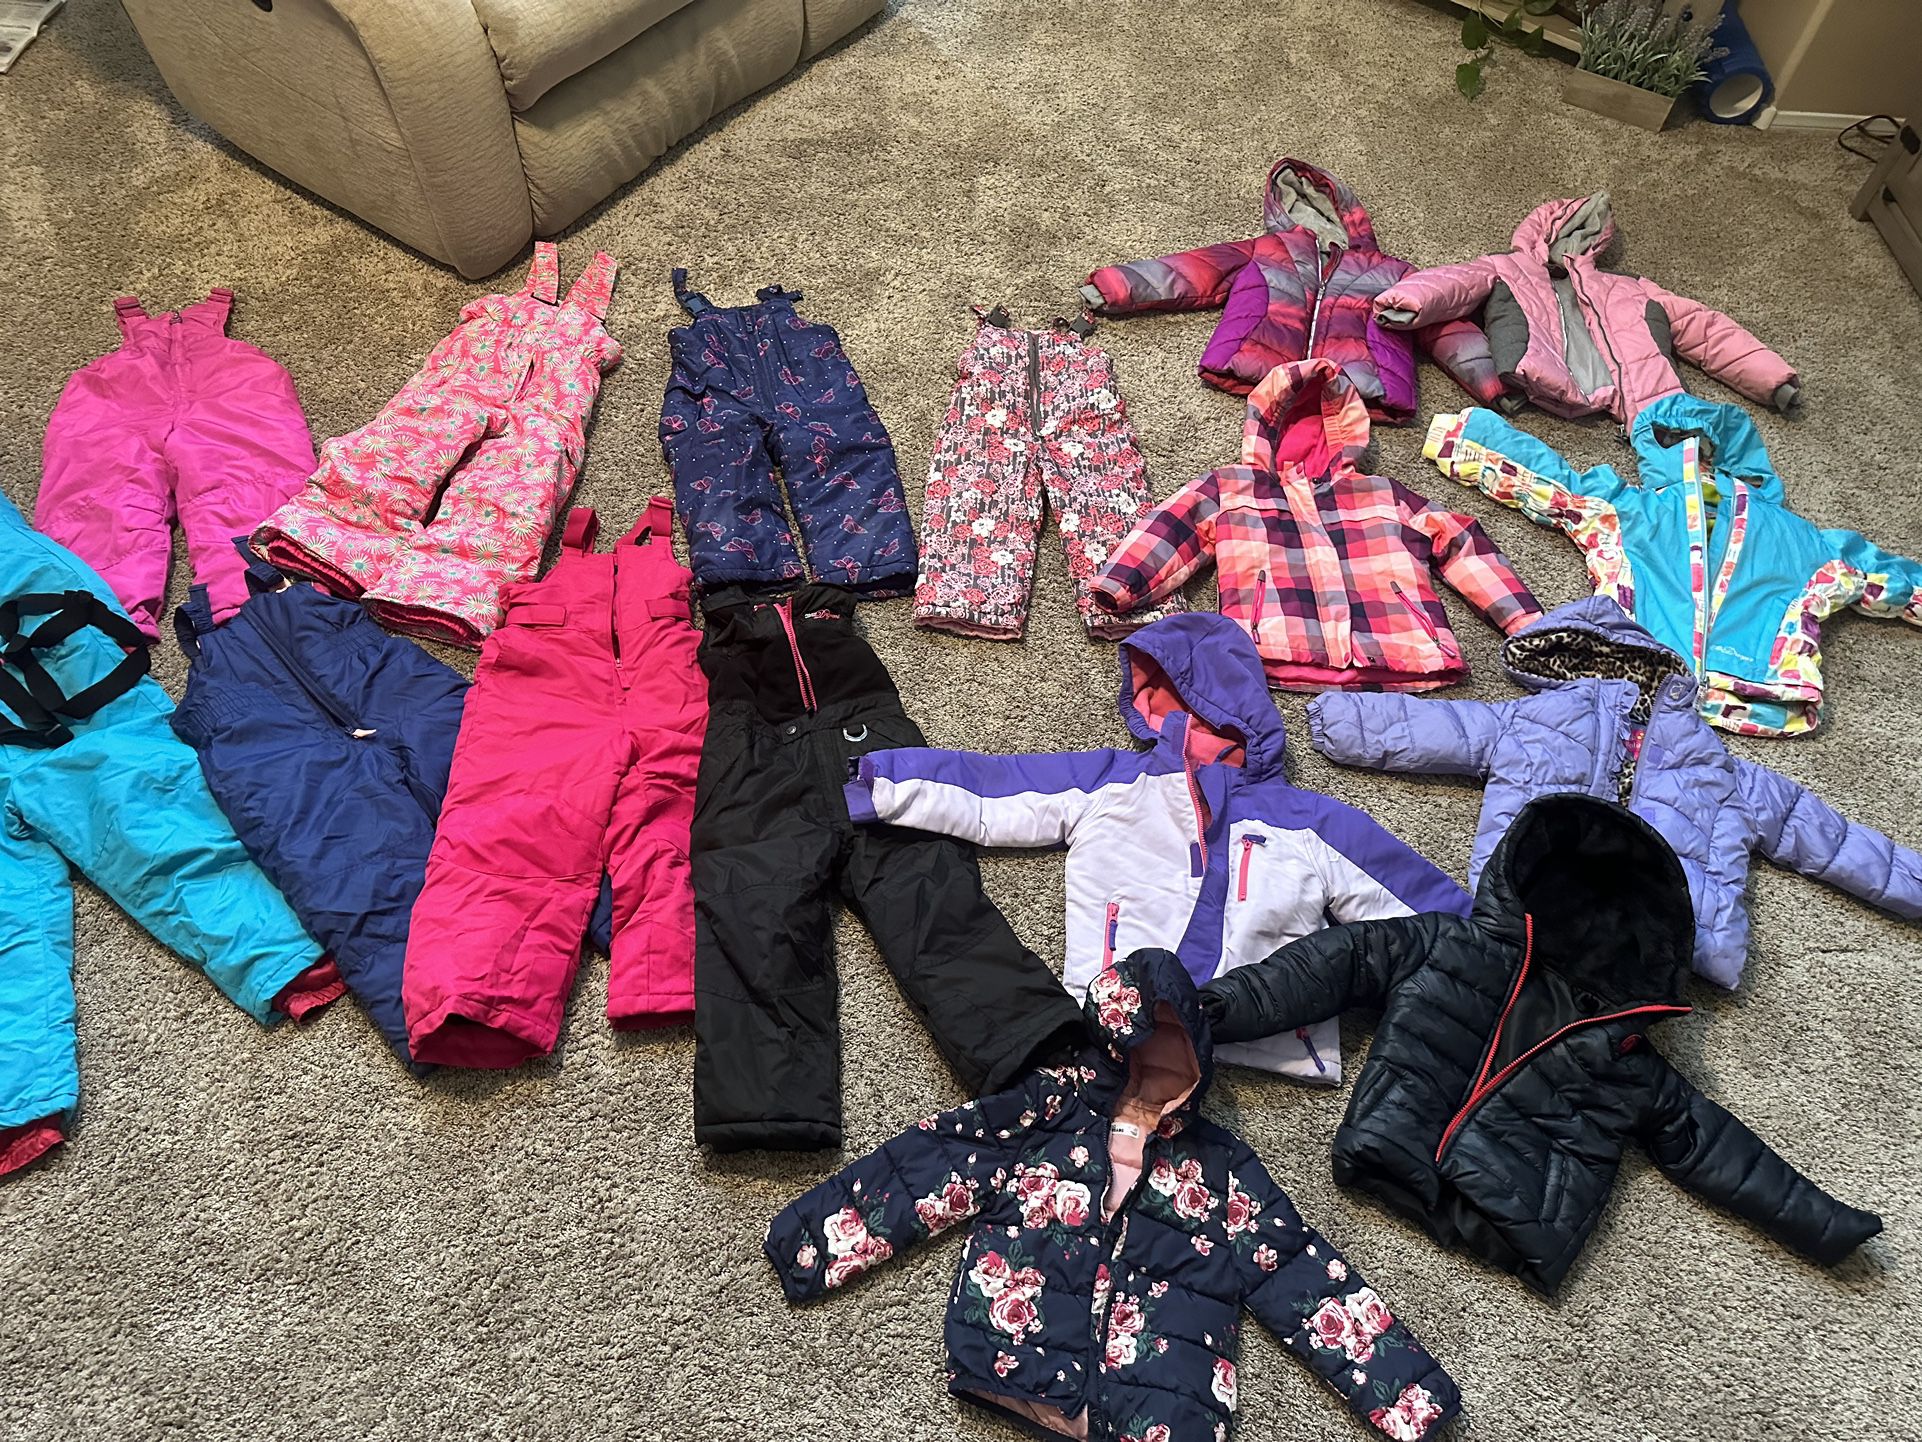 *Girls And Boys Winter Coats And Snow Pants Size 4**